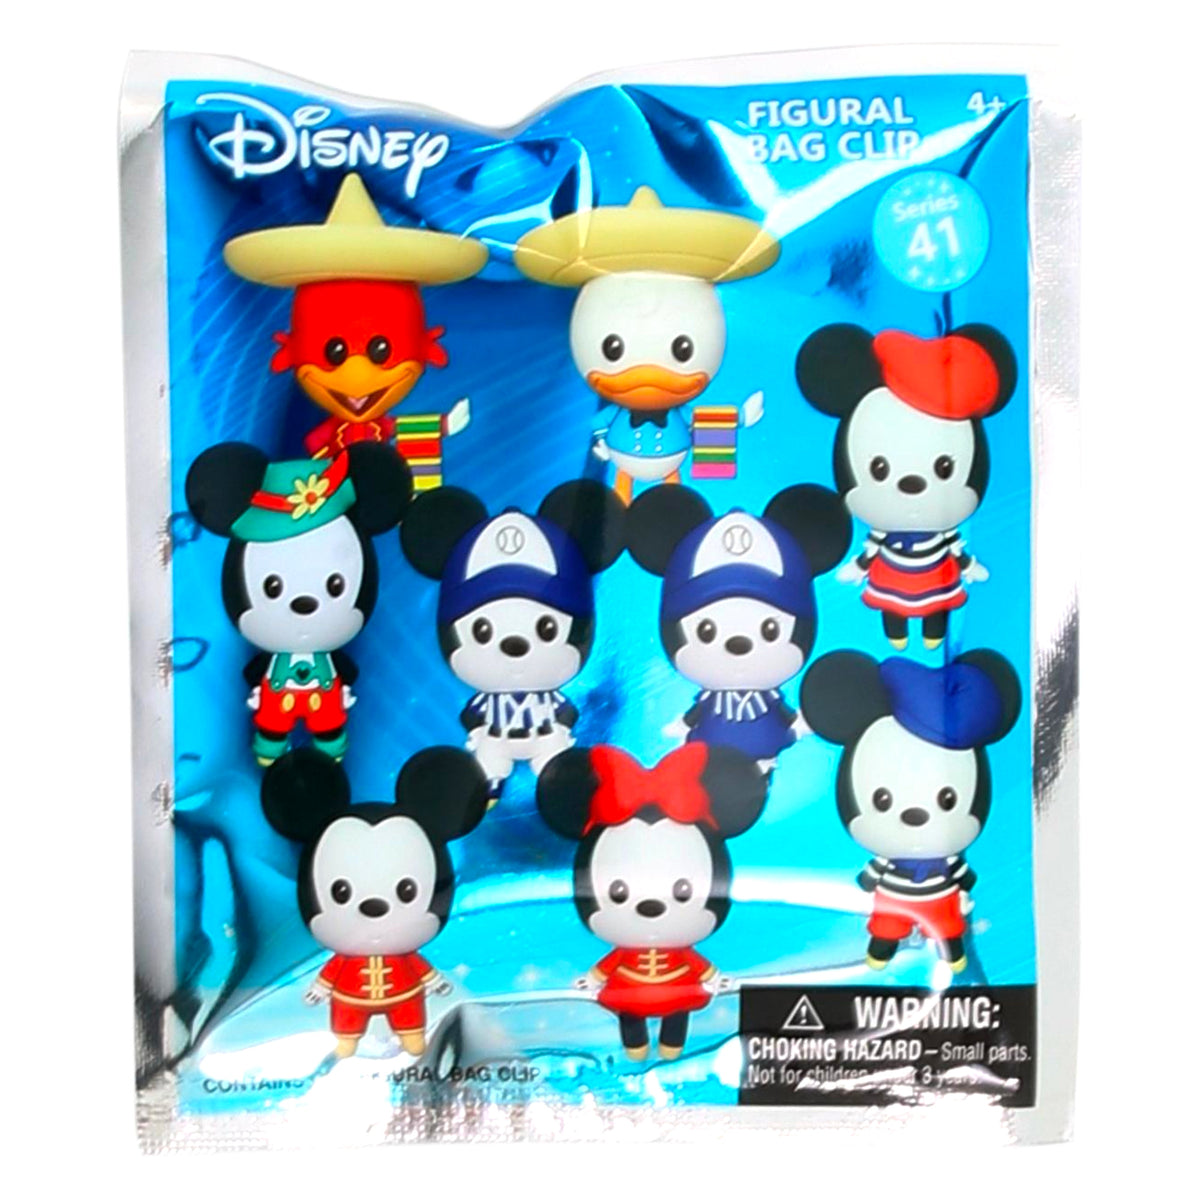 Disney Mickey and Minnie Around the World Collectible 3D Bag Clip Series 41 - Mystery Bag